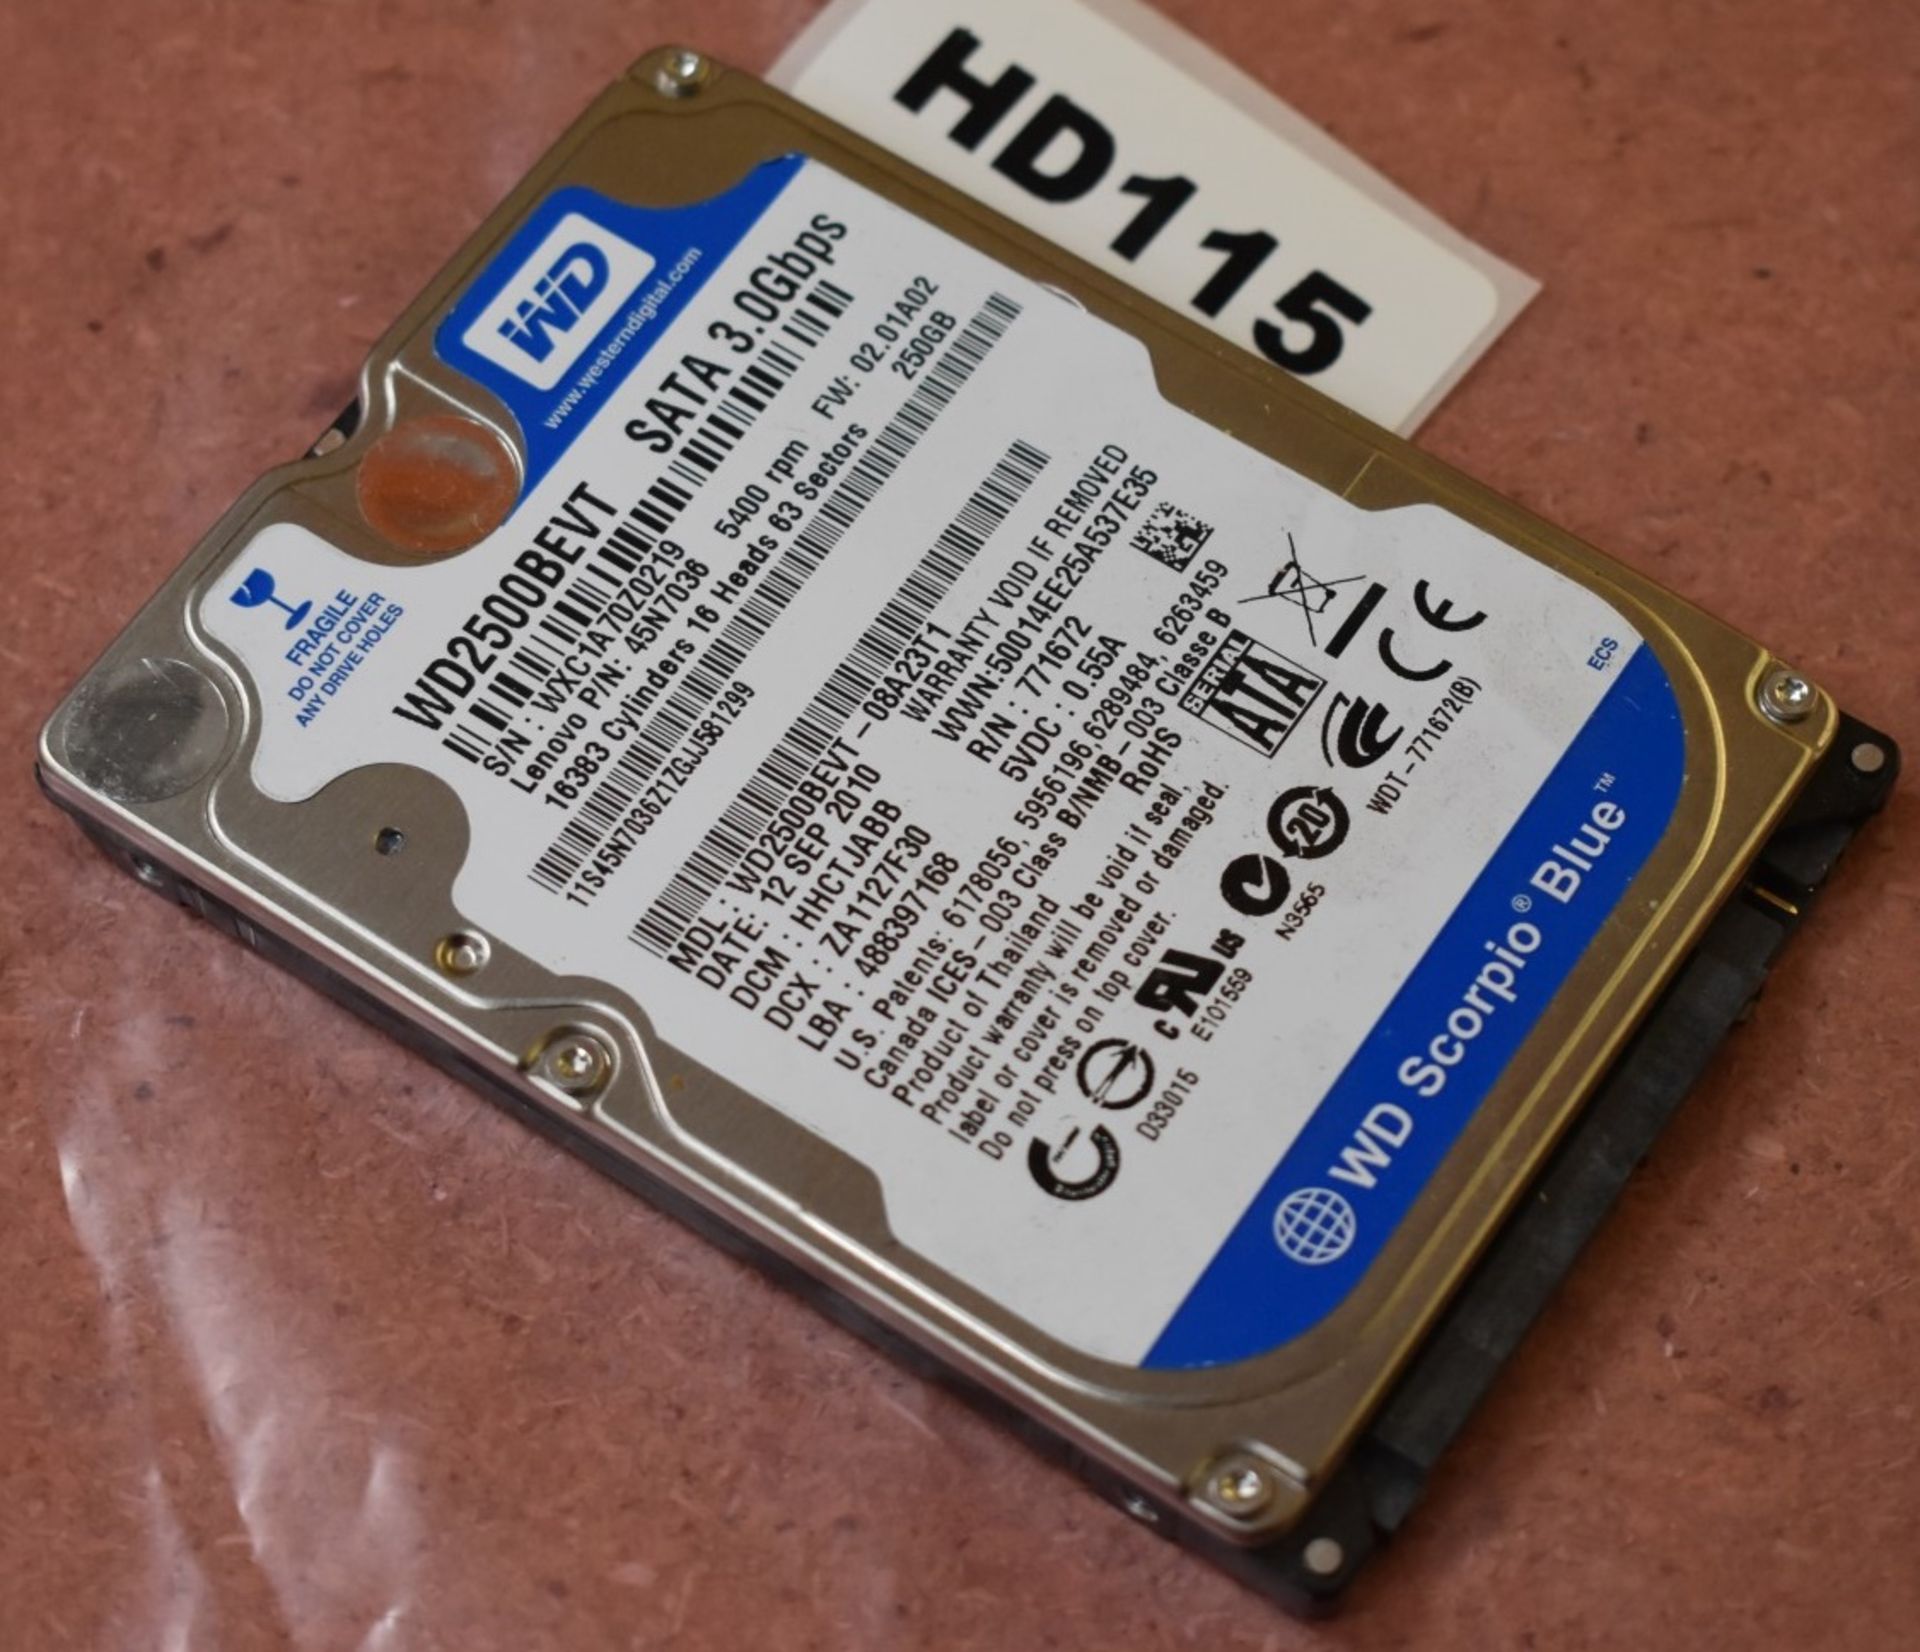 4 x Western Digital 250gb Scorpio Blue 2.5 Inch SATA Hard Drives - Tested and Formatted - HD115/